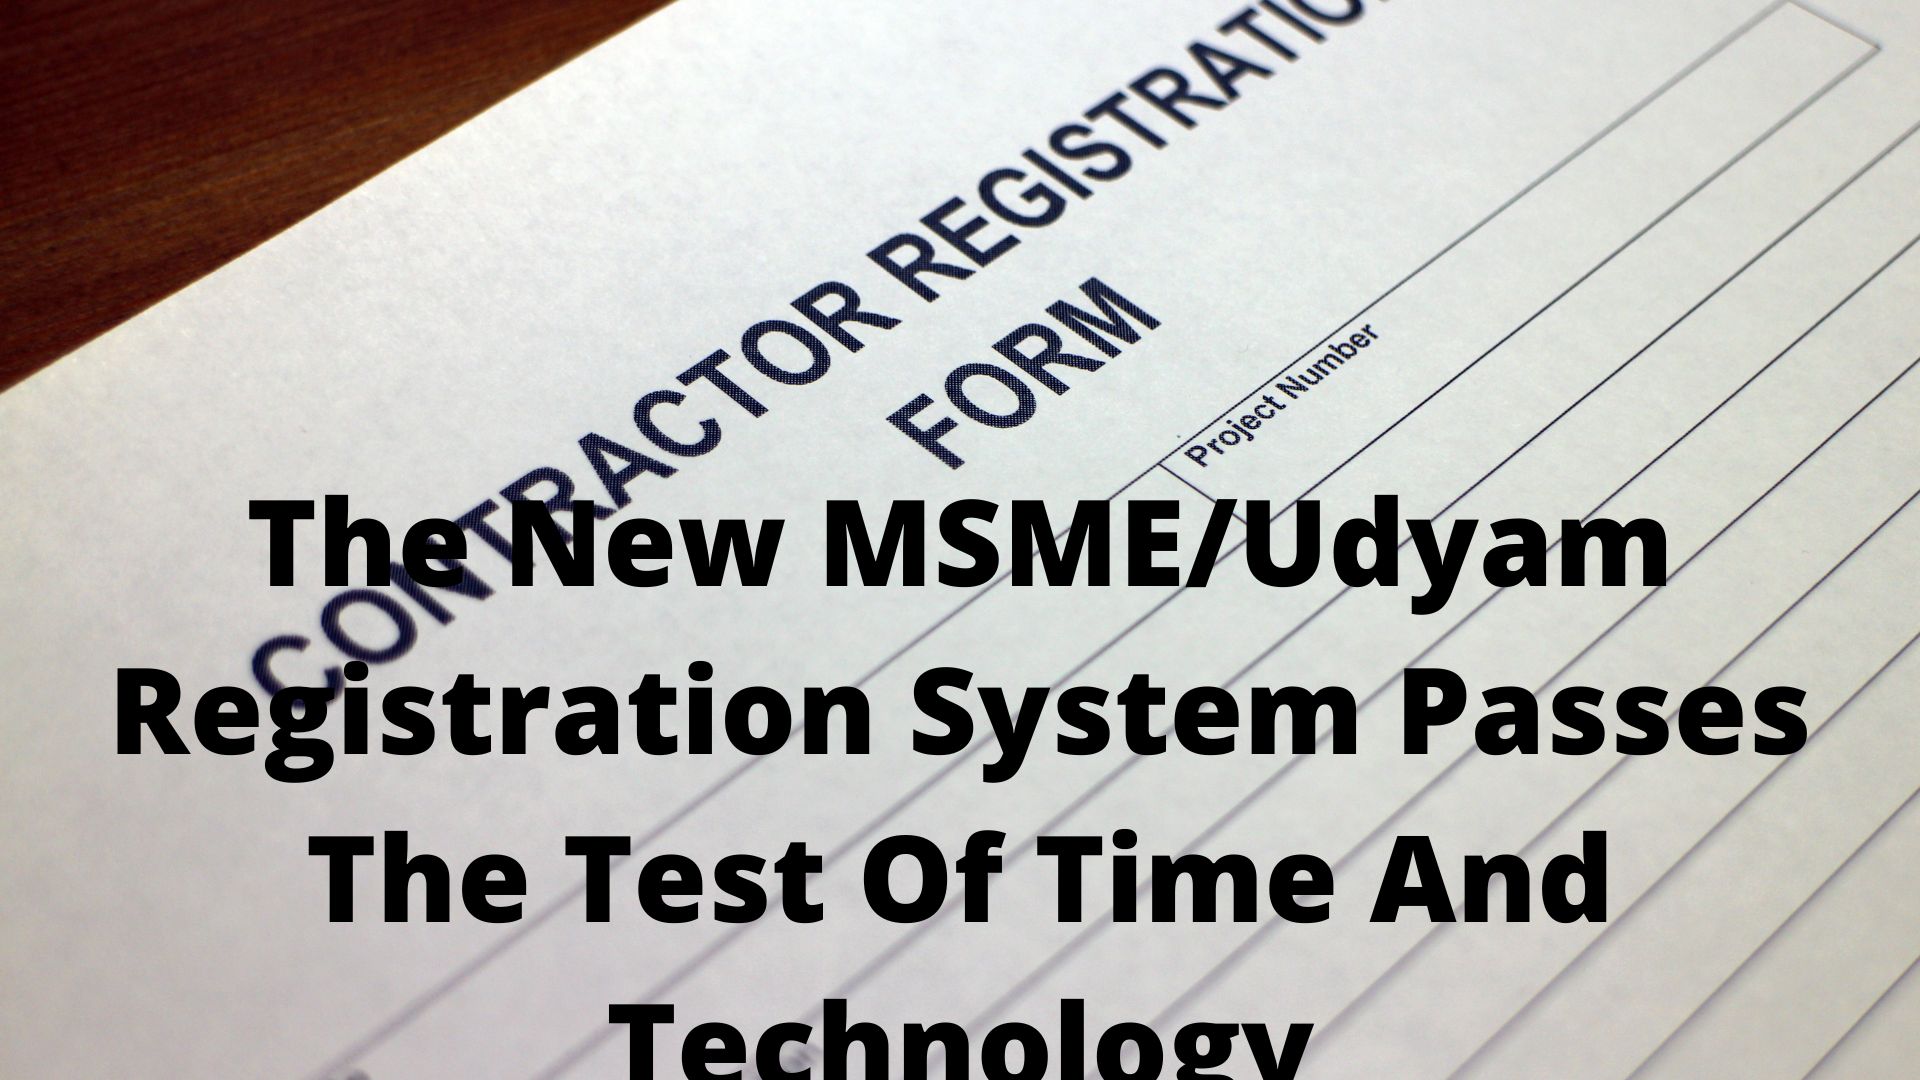 The New MSME/Udyam Registration System Passes The Test Of Time And Technology